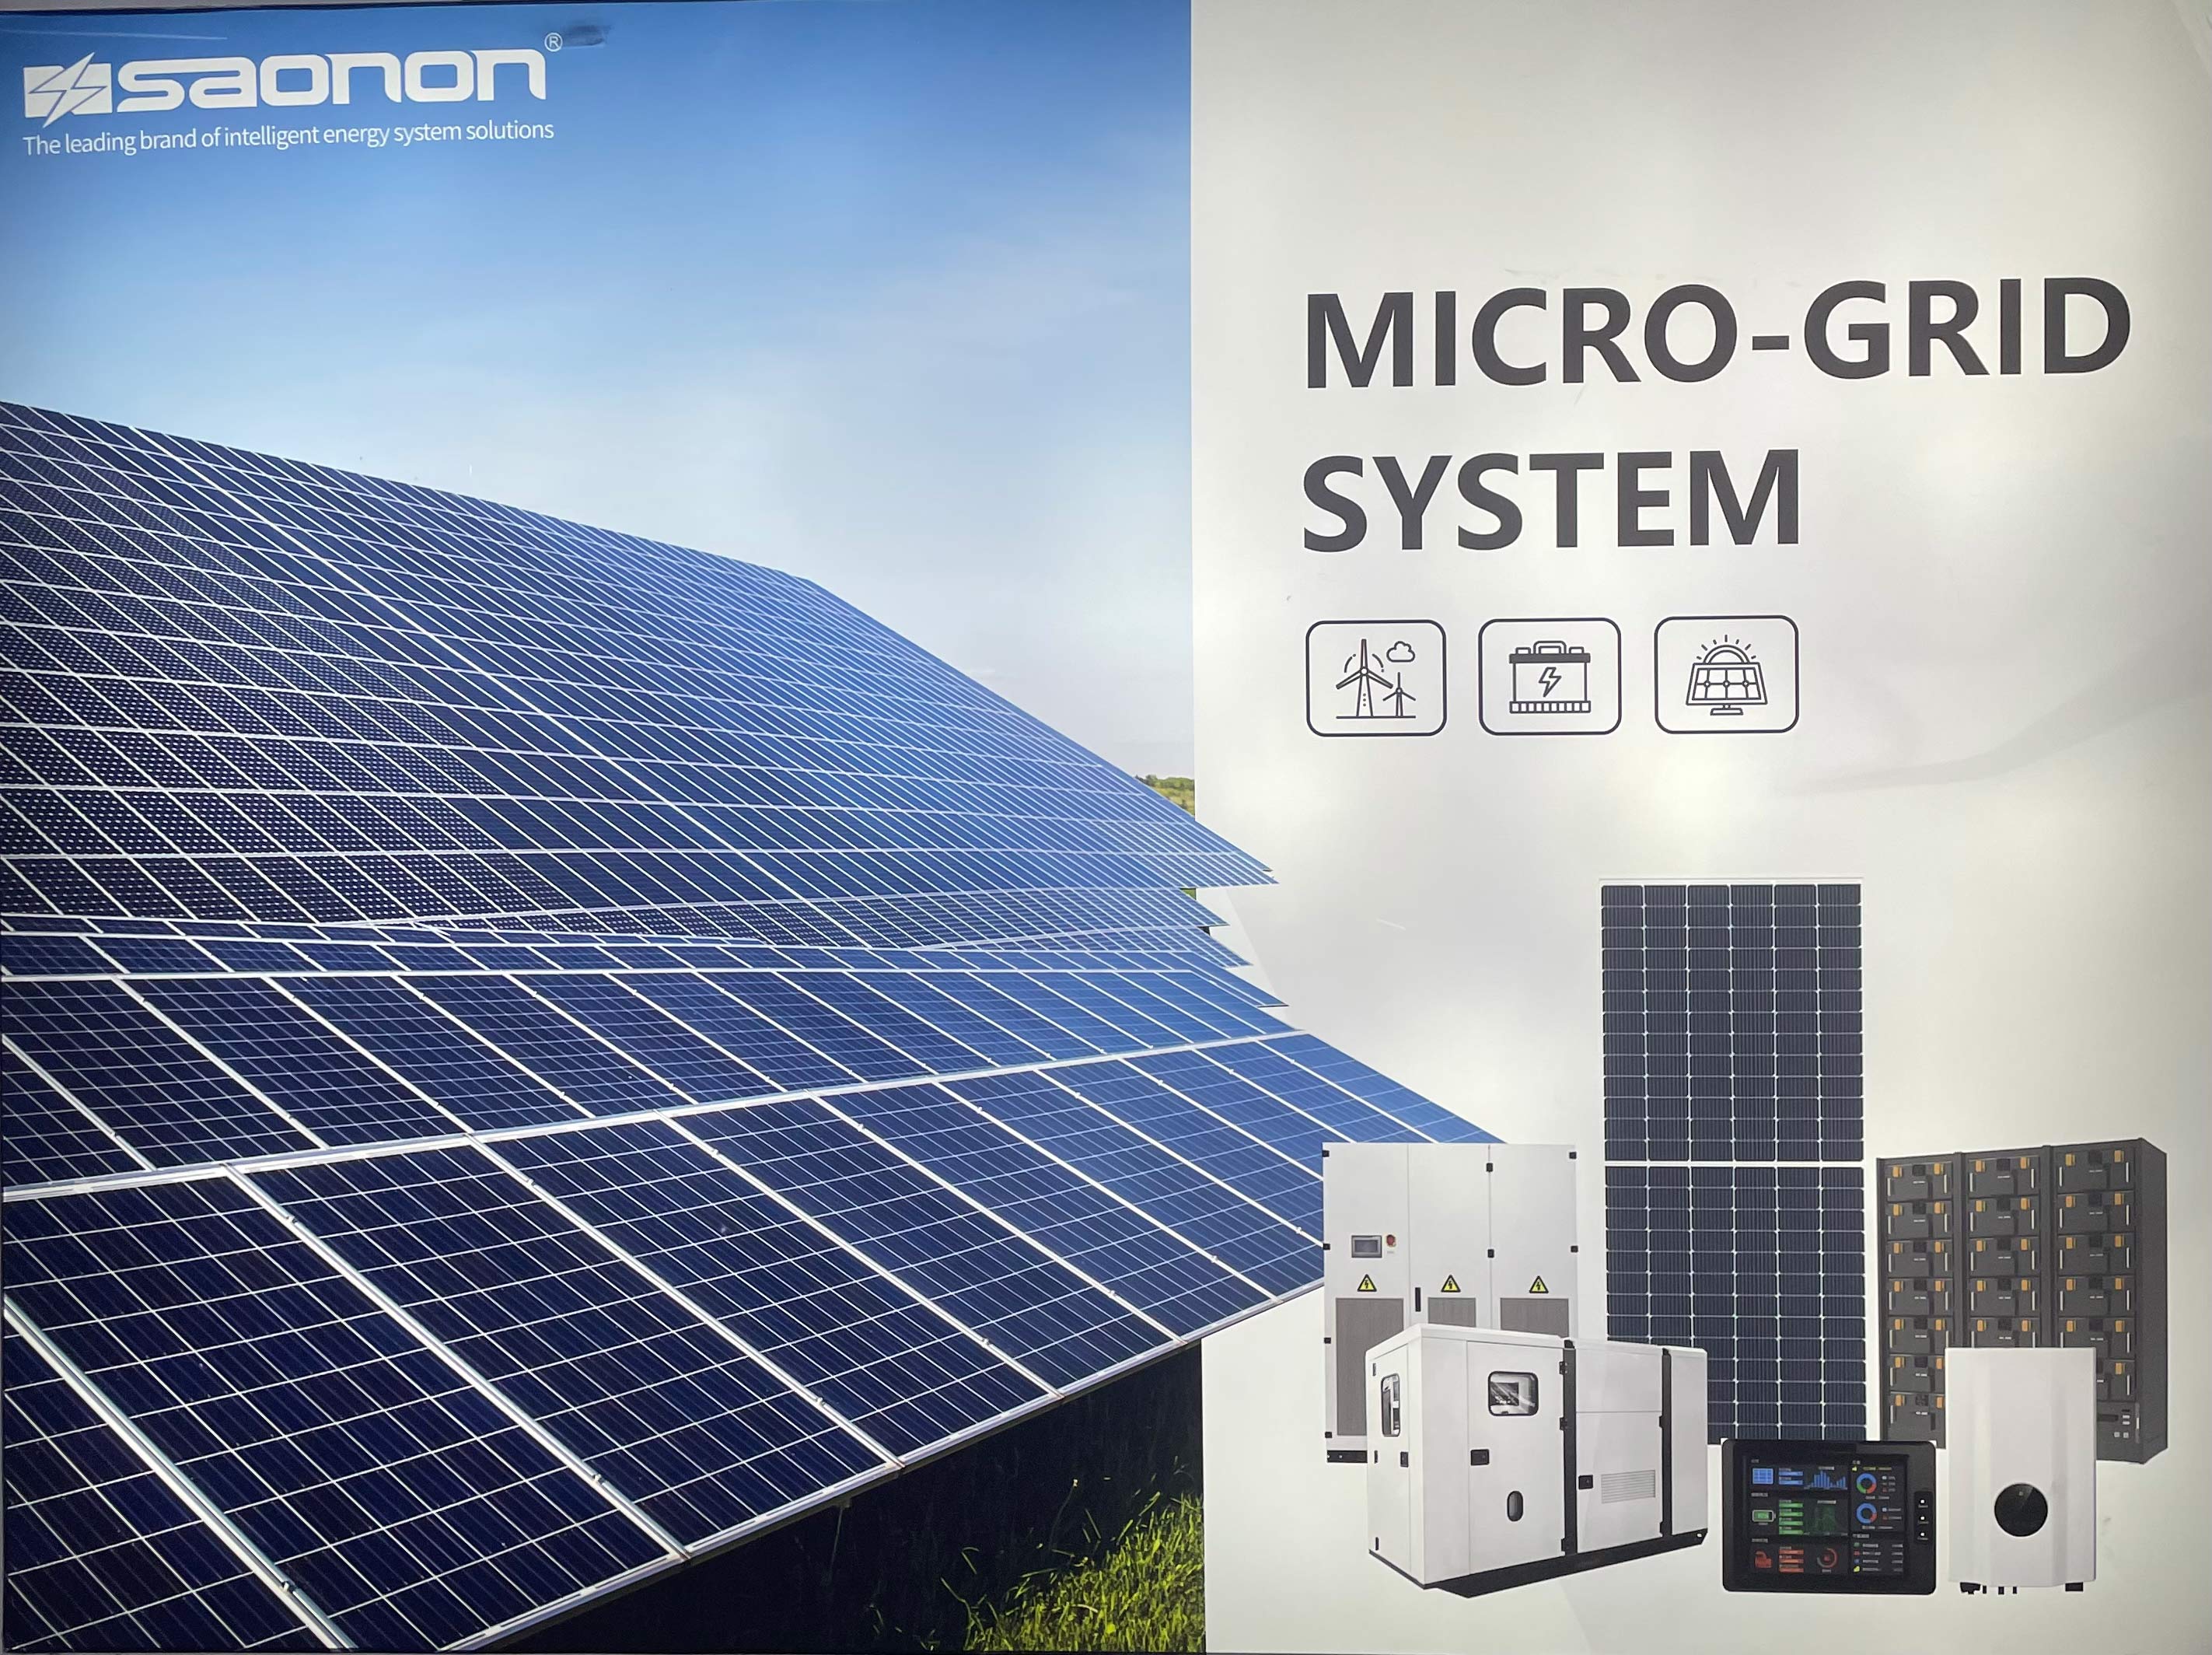 Wanon’s Micro-grid System debuted at the 133rd Canton Fair